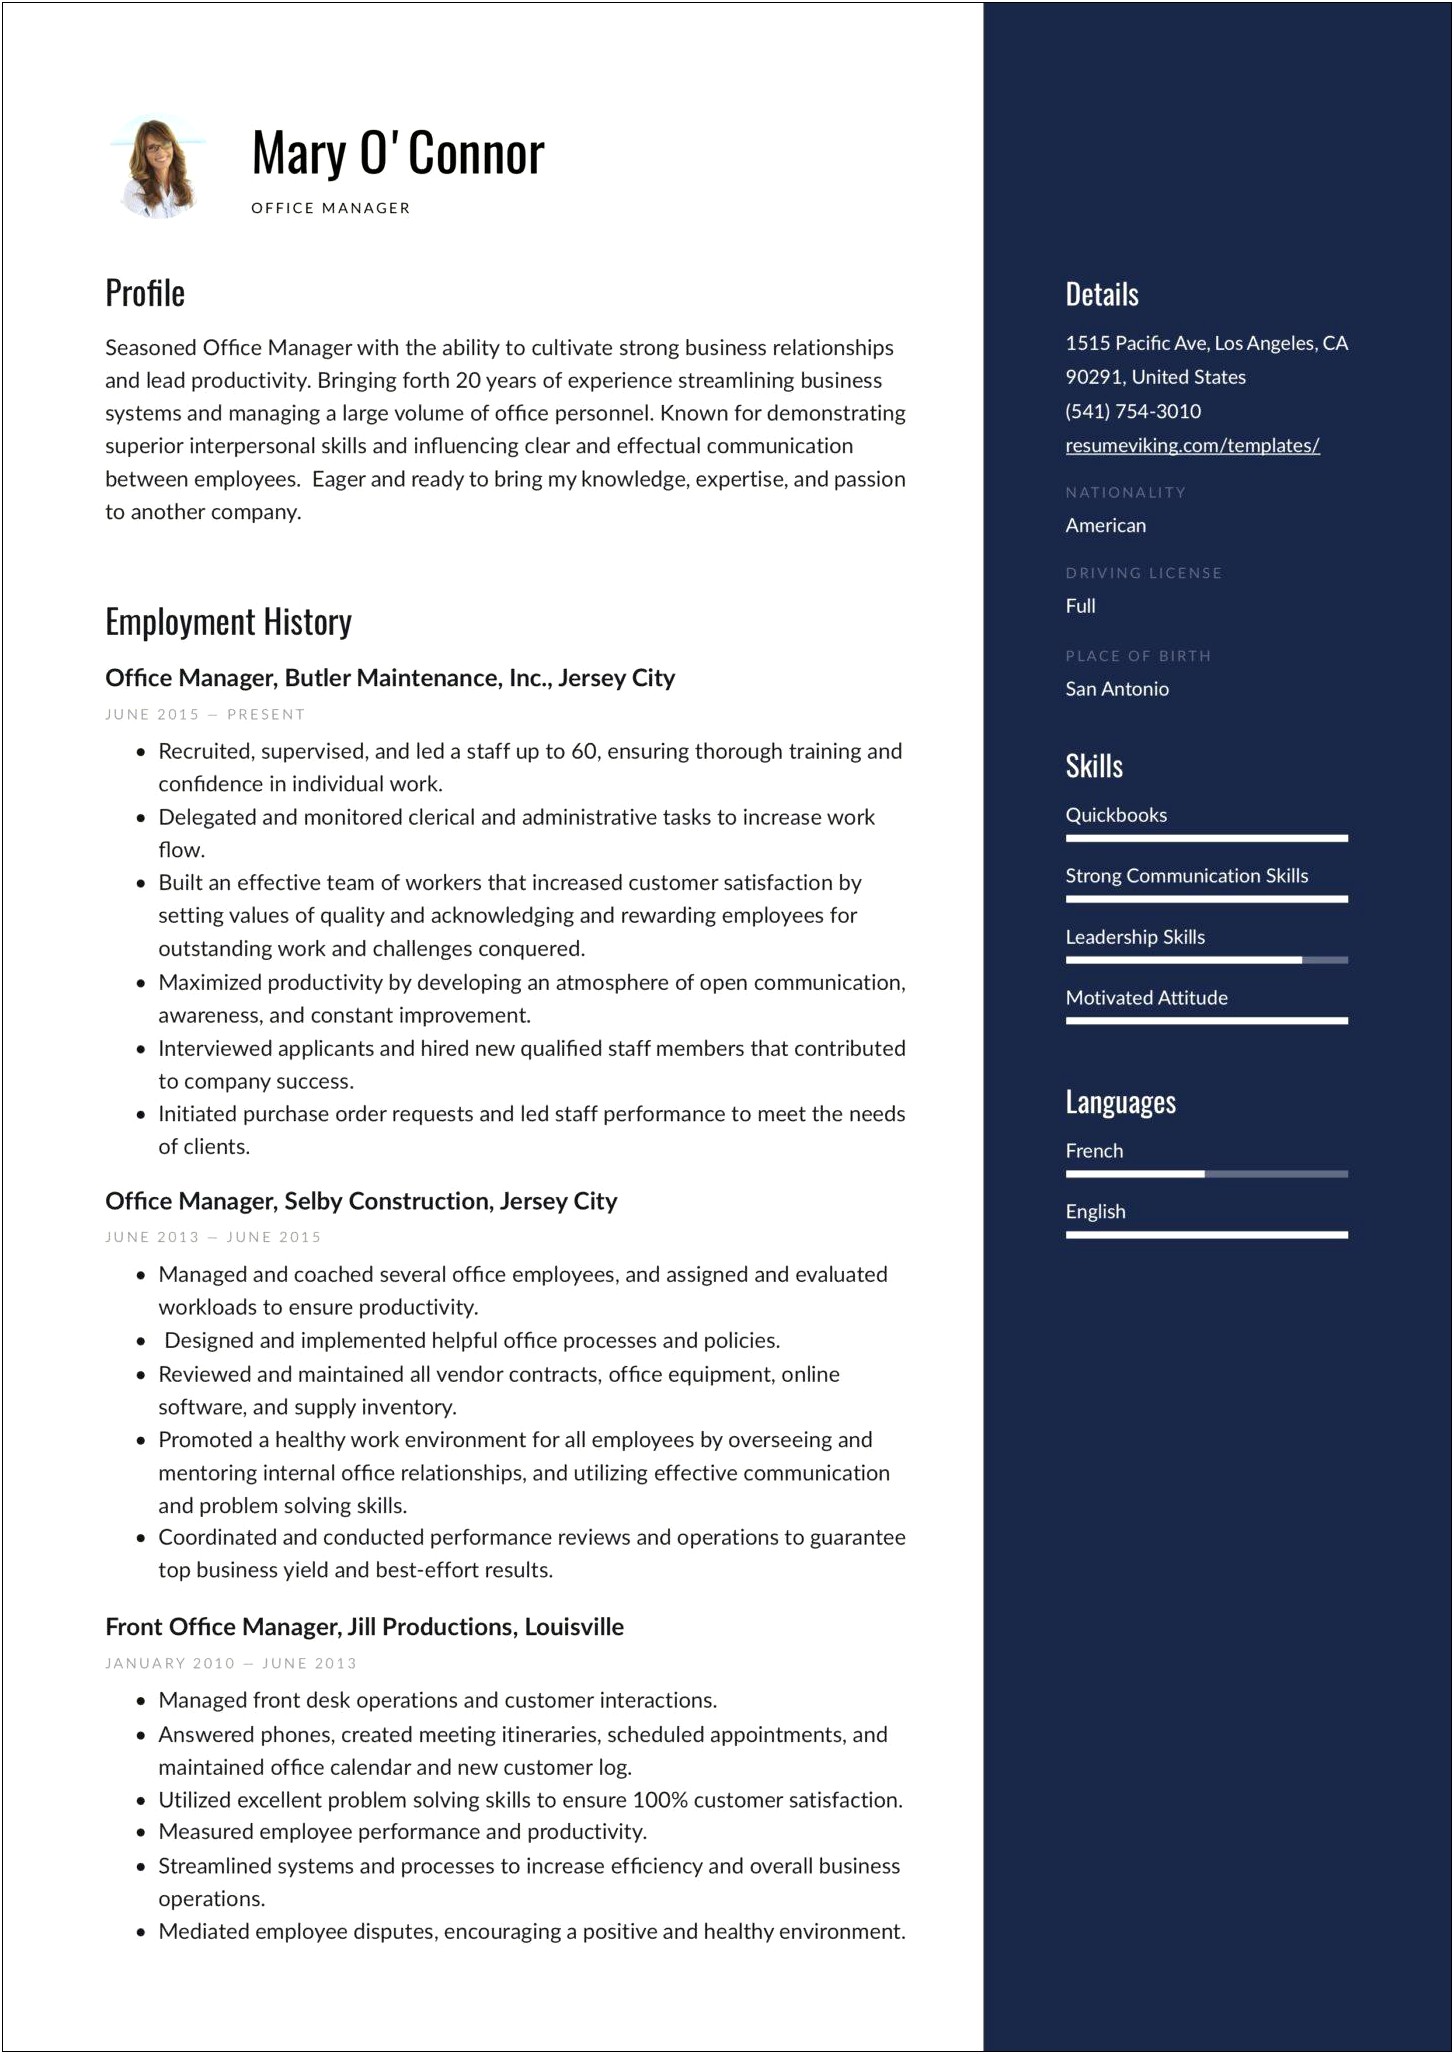 Resume Format For Front Office Manager